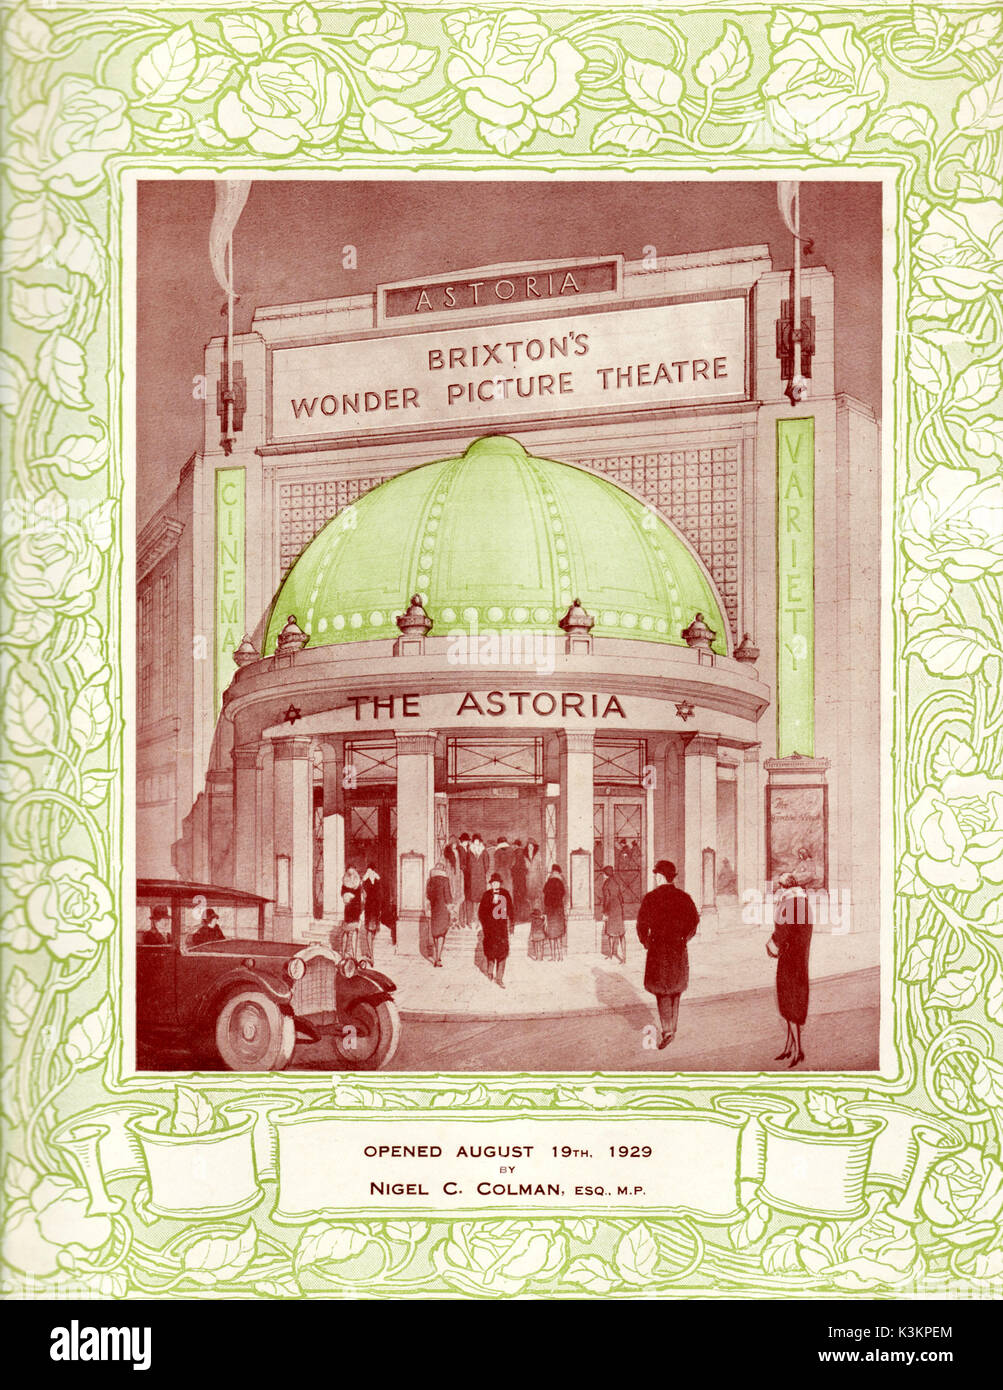 OPENING PROGRAMME FOR THE ASTORIA BRIXTON ON 19TH AUGUST 1929 Stock Photo